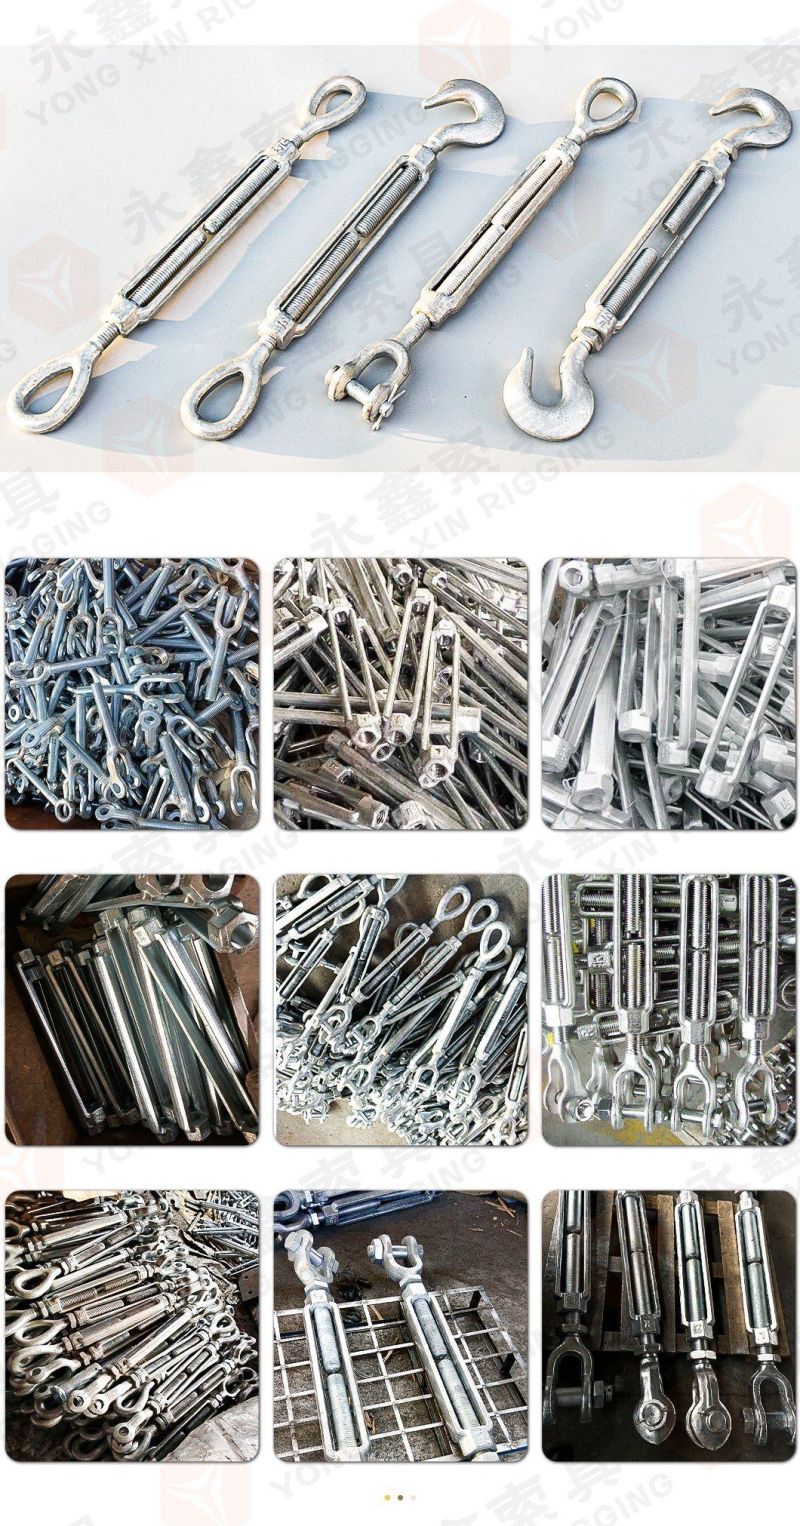 Eye and Jaw Type Heavy Duty Wire Rope Turnbuckle